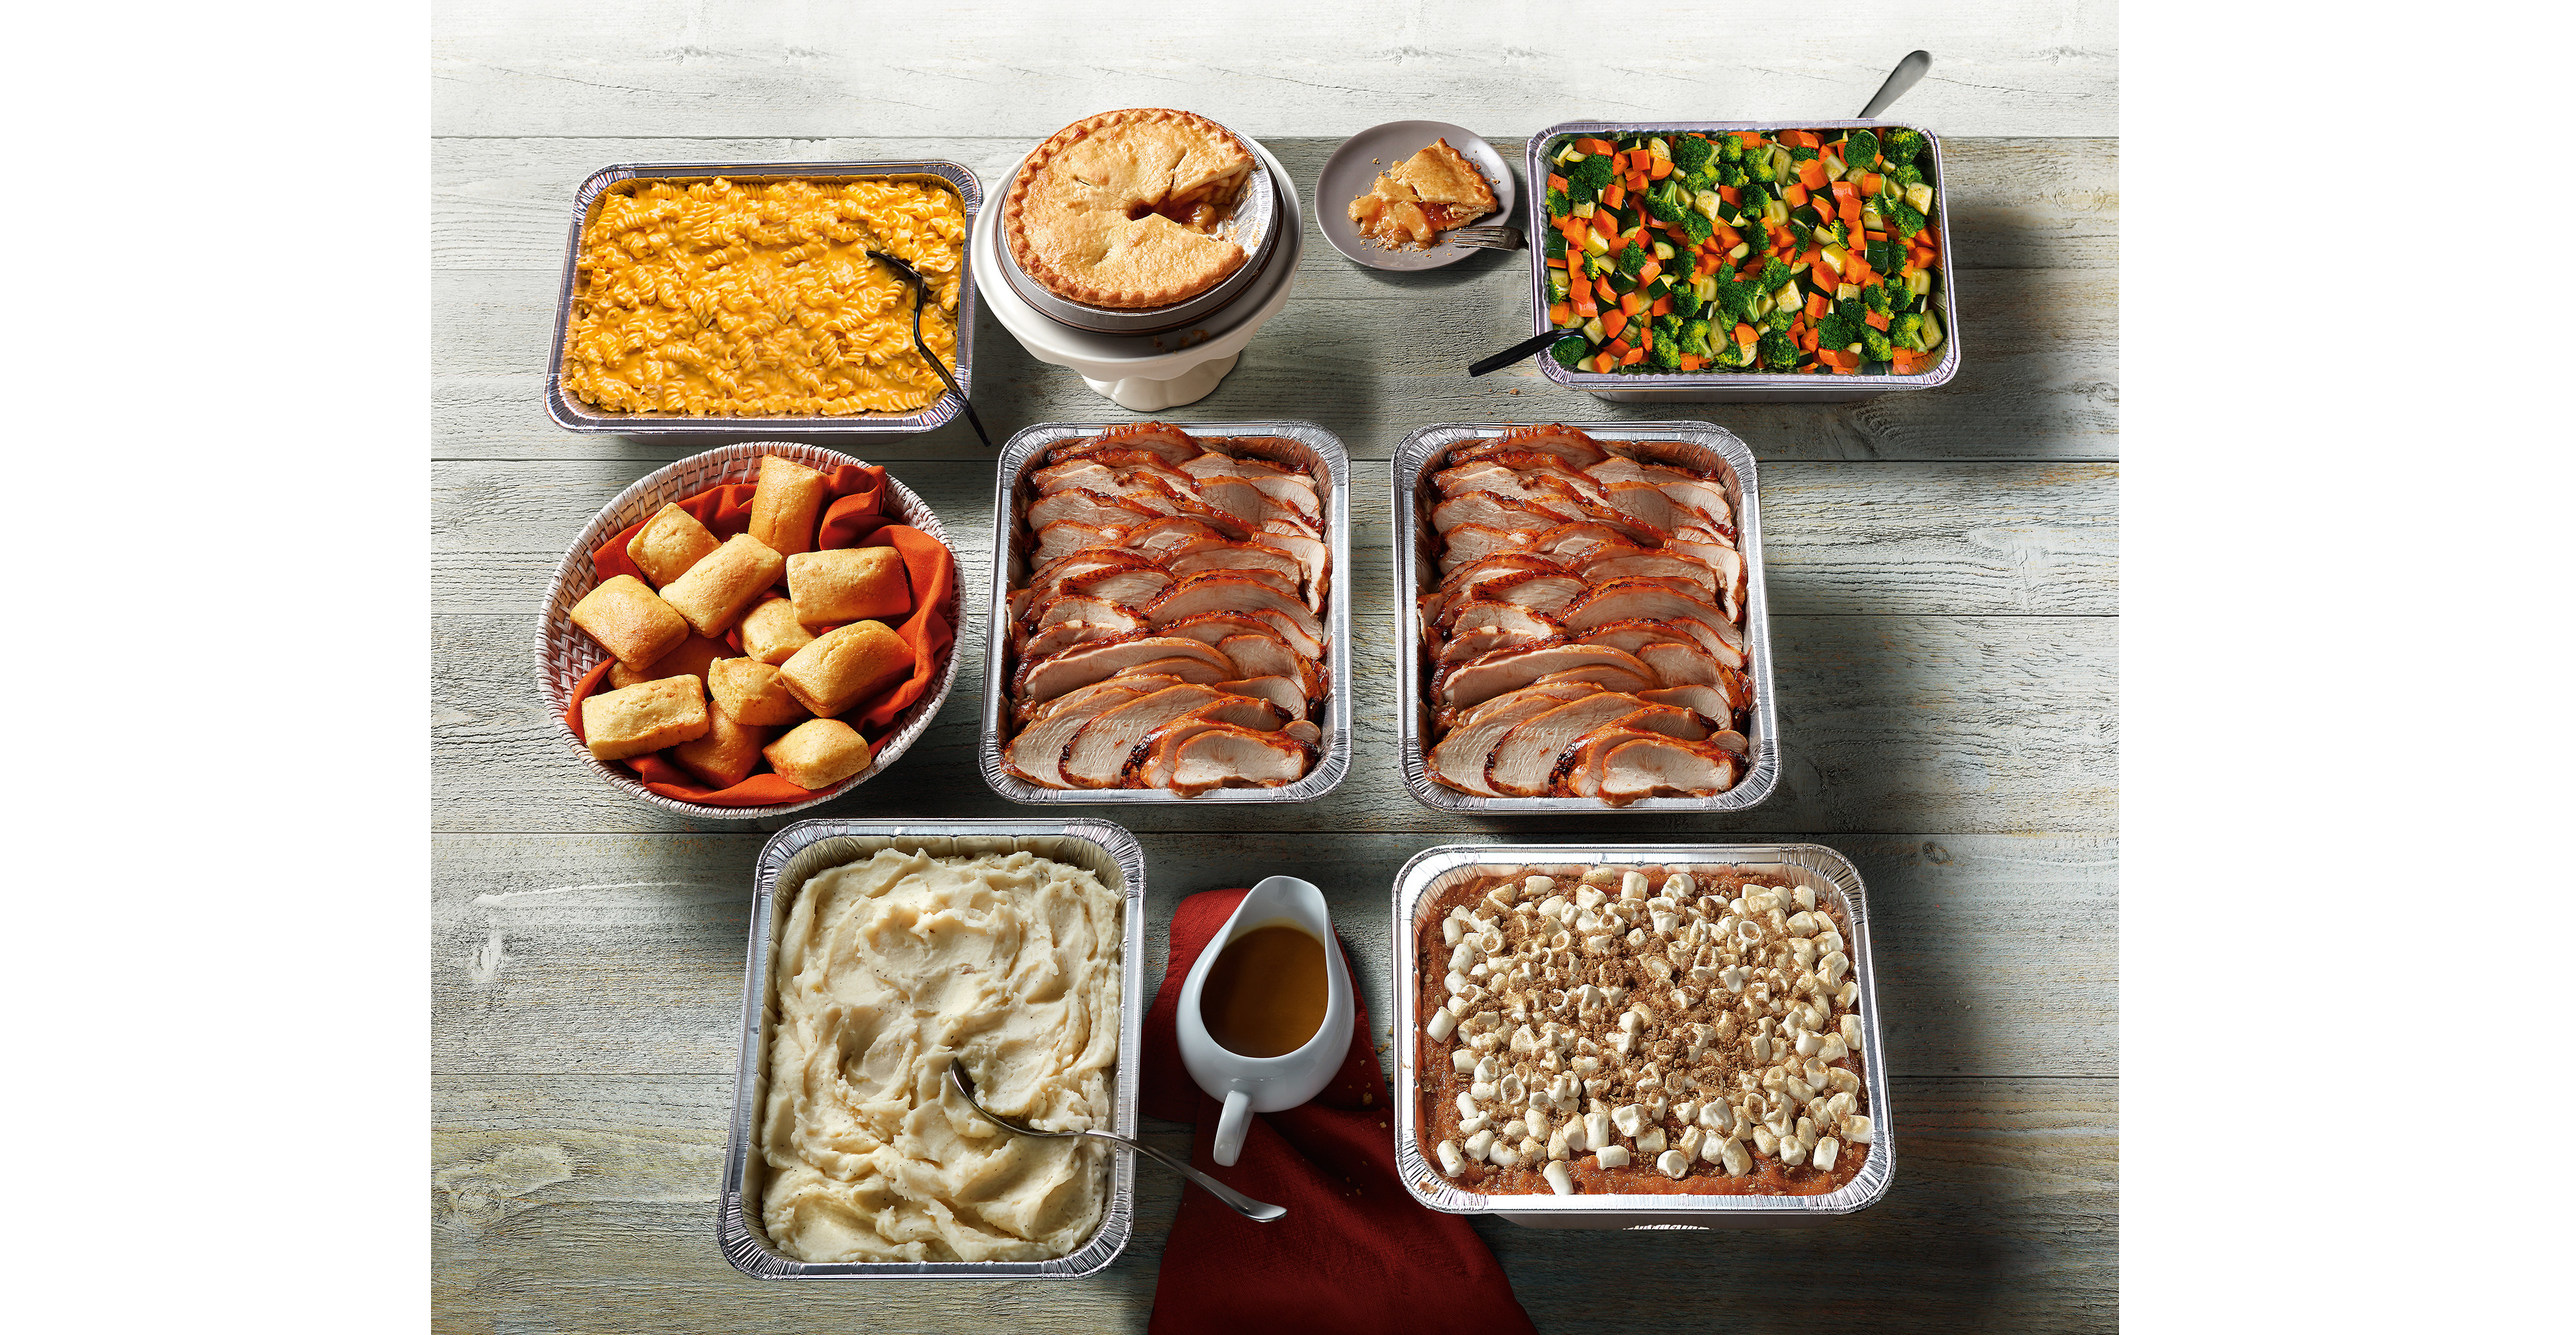 Boston Market Puts Easter Dinner On The Table With A Host Of Convenient